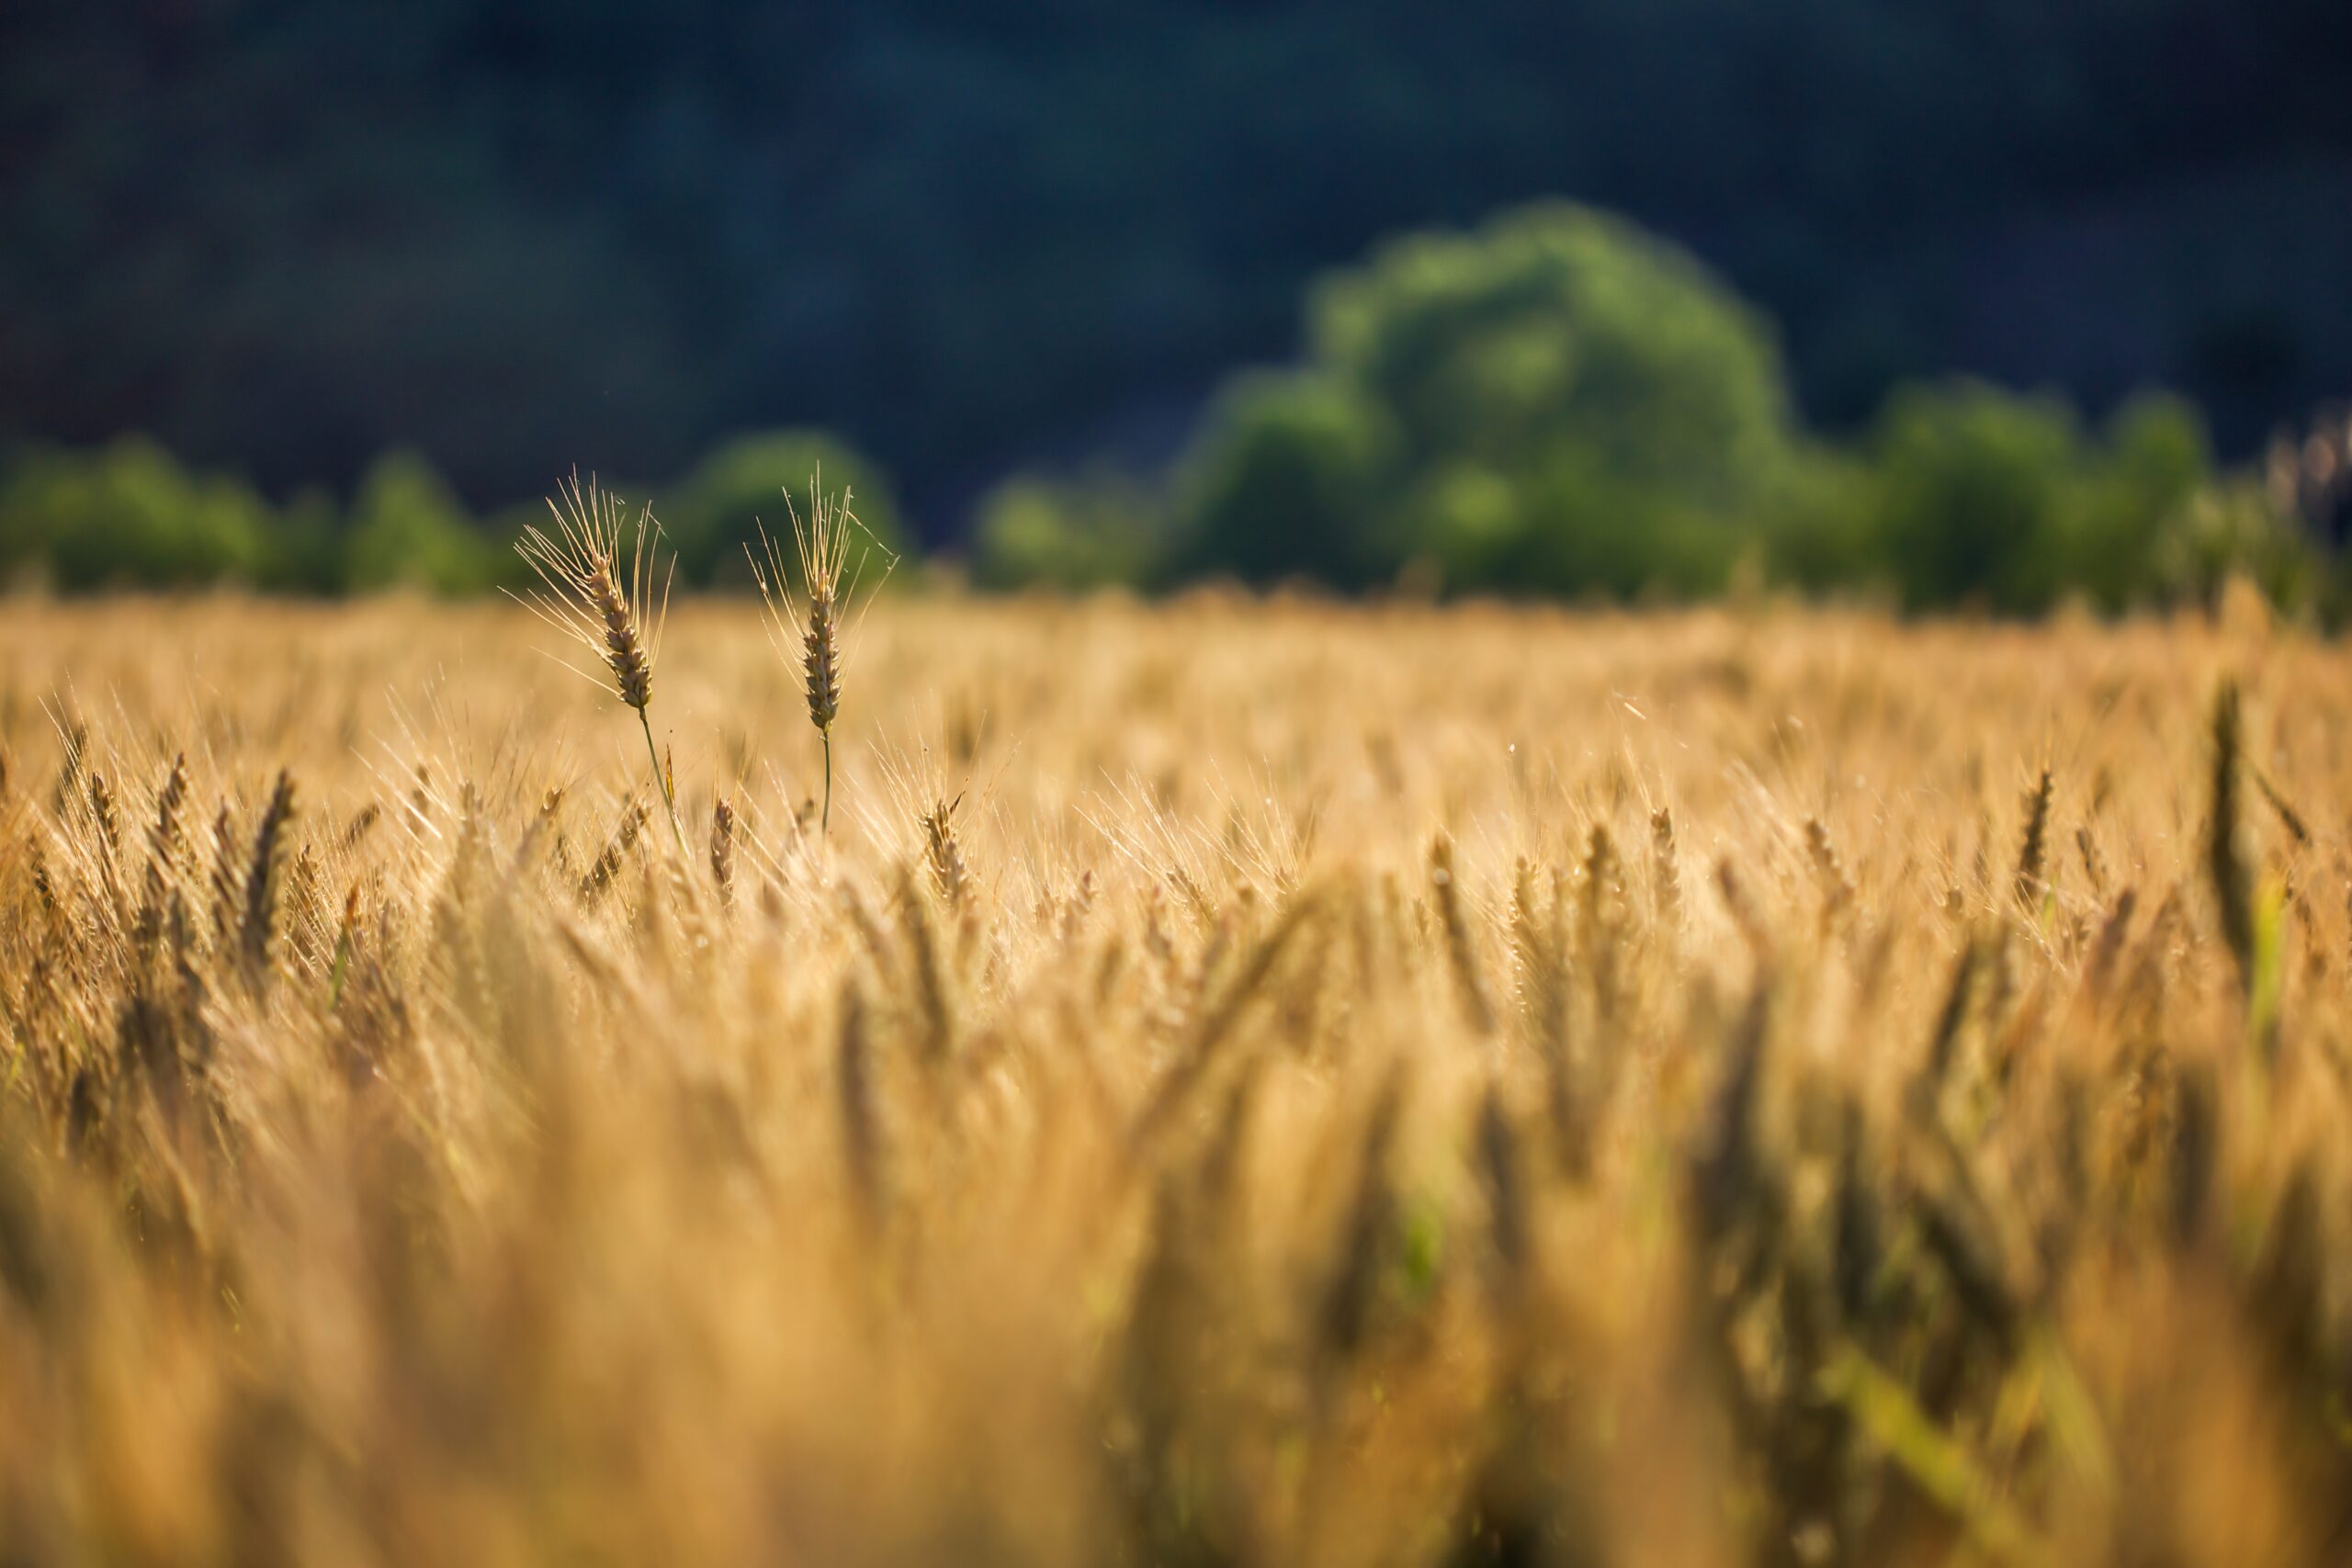 Selective shot of golden wheat in a wheat field with a blurred background